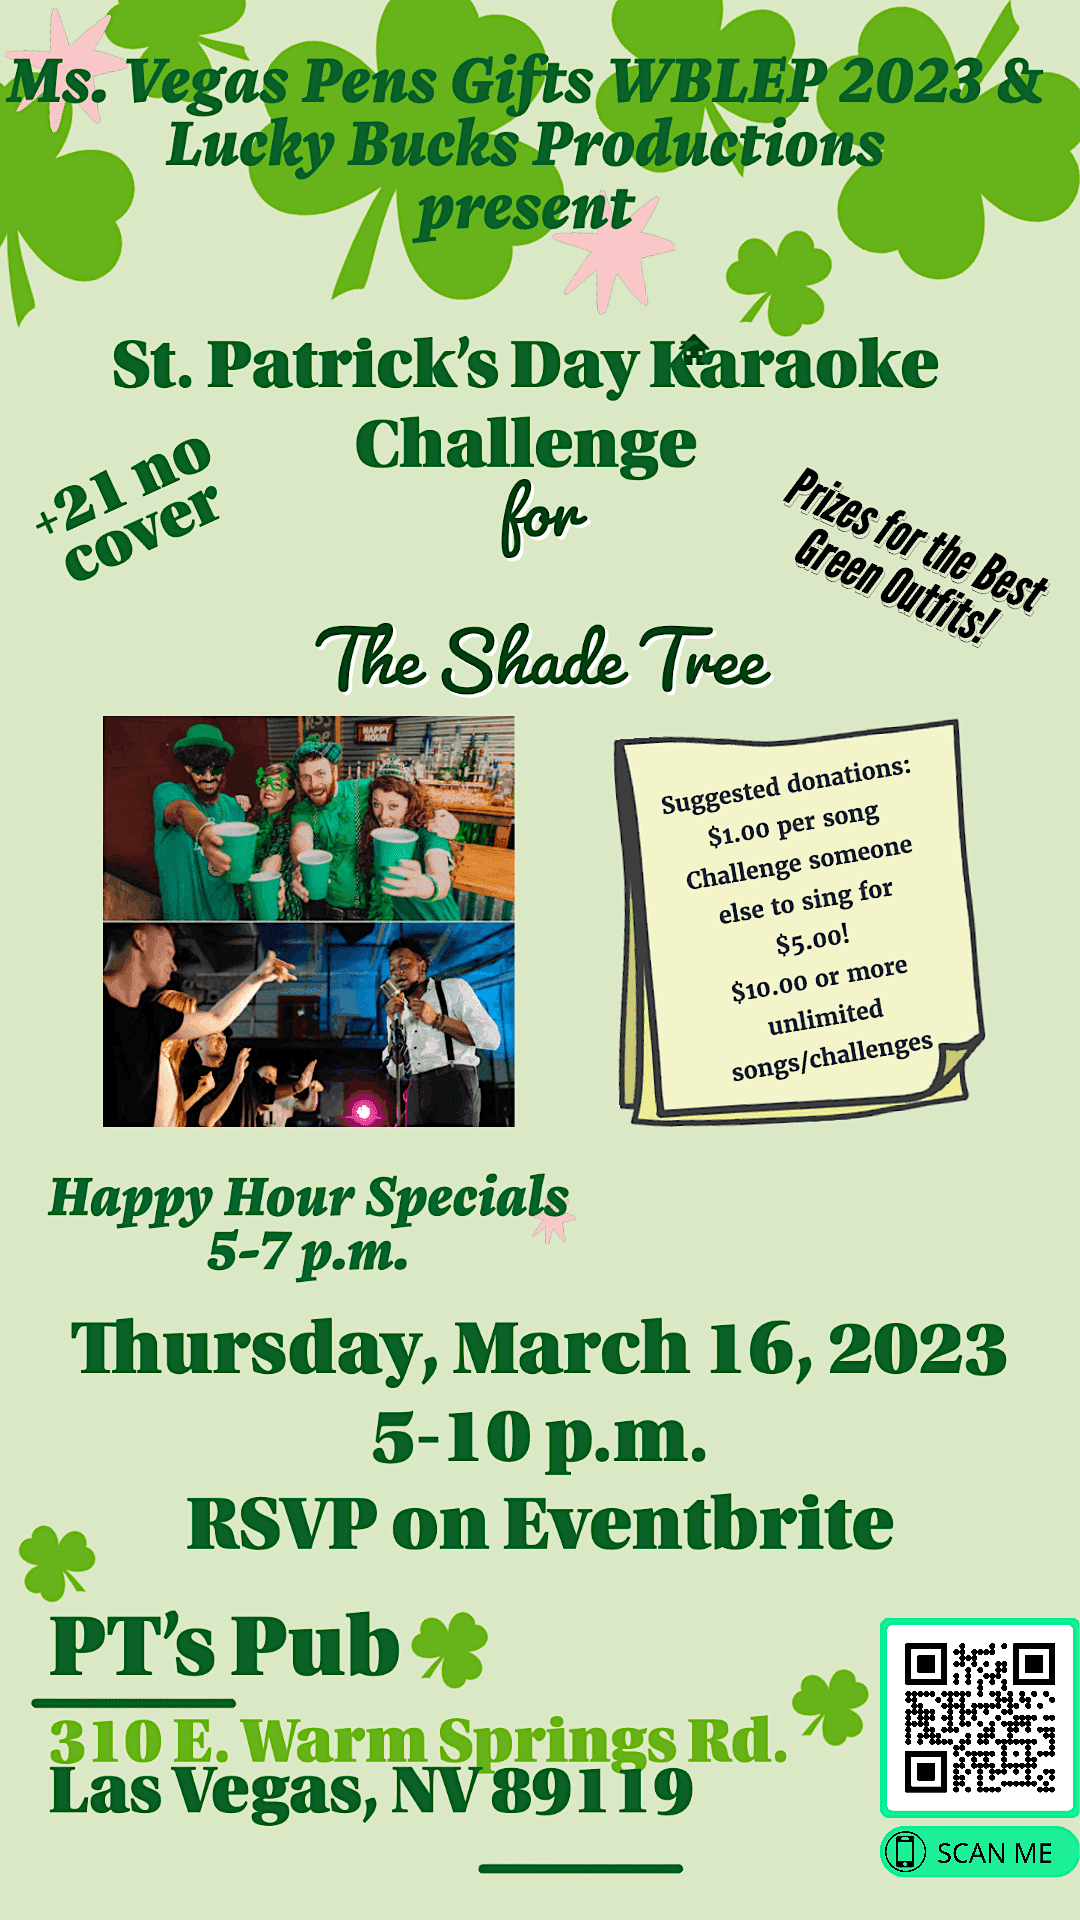 St. Patrick's Day Karaoke Challenge for The Shade Tree